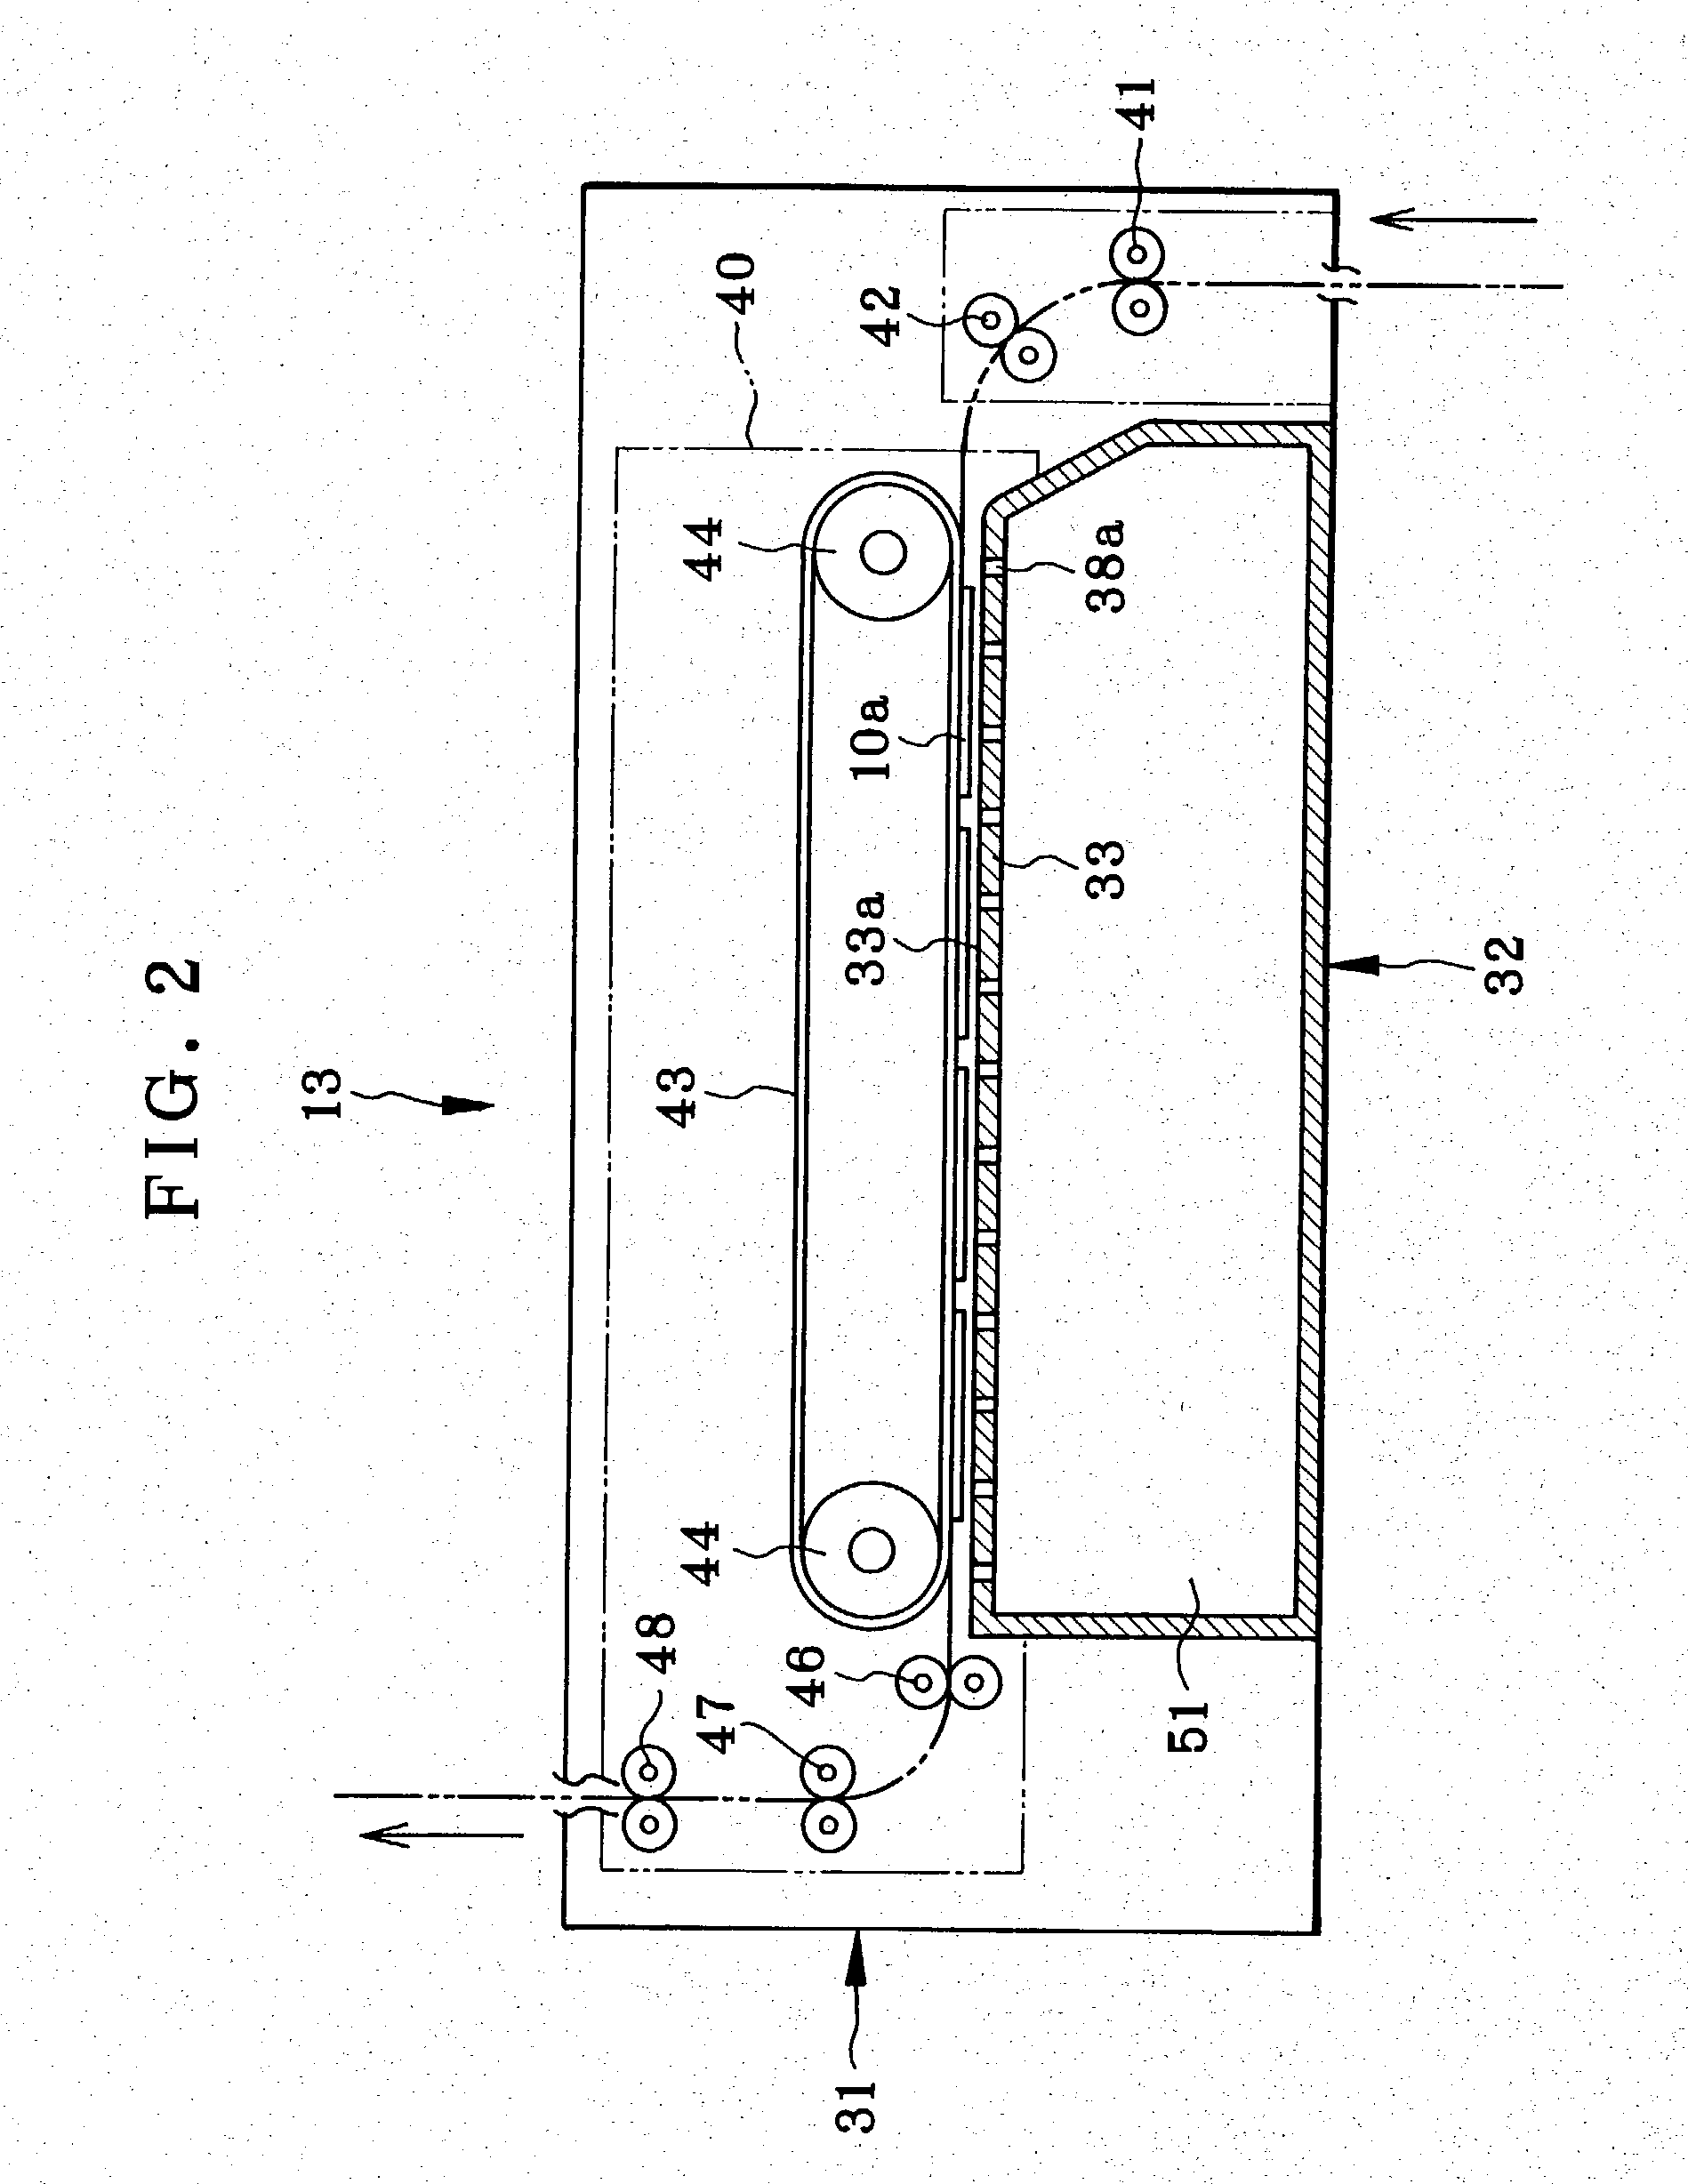 Photographic processing apparatus for photosensitive material